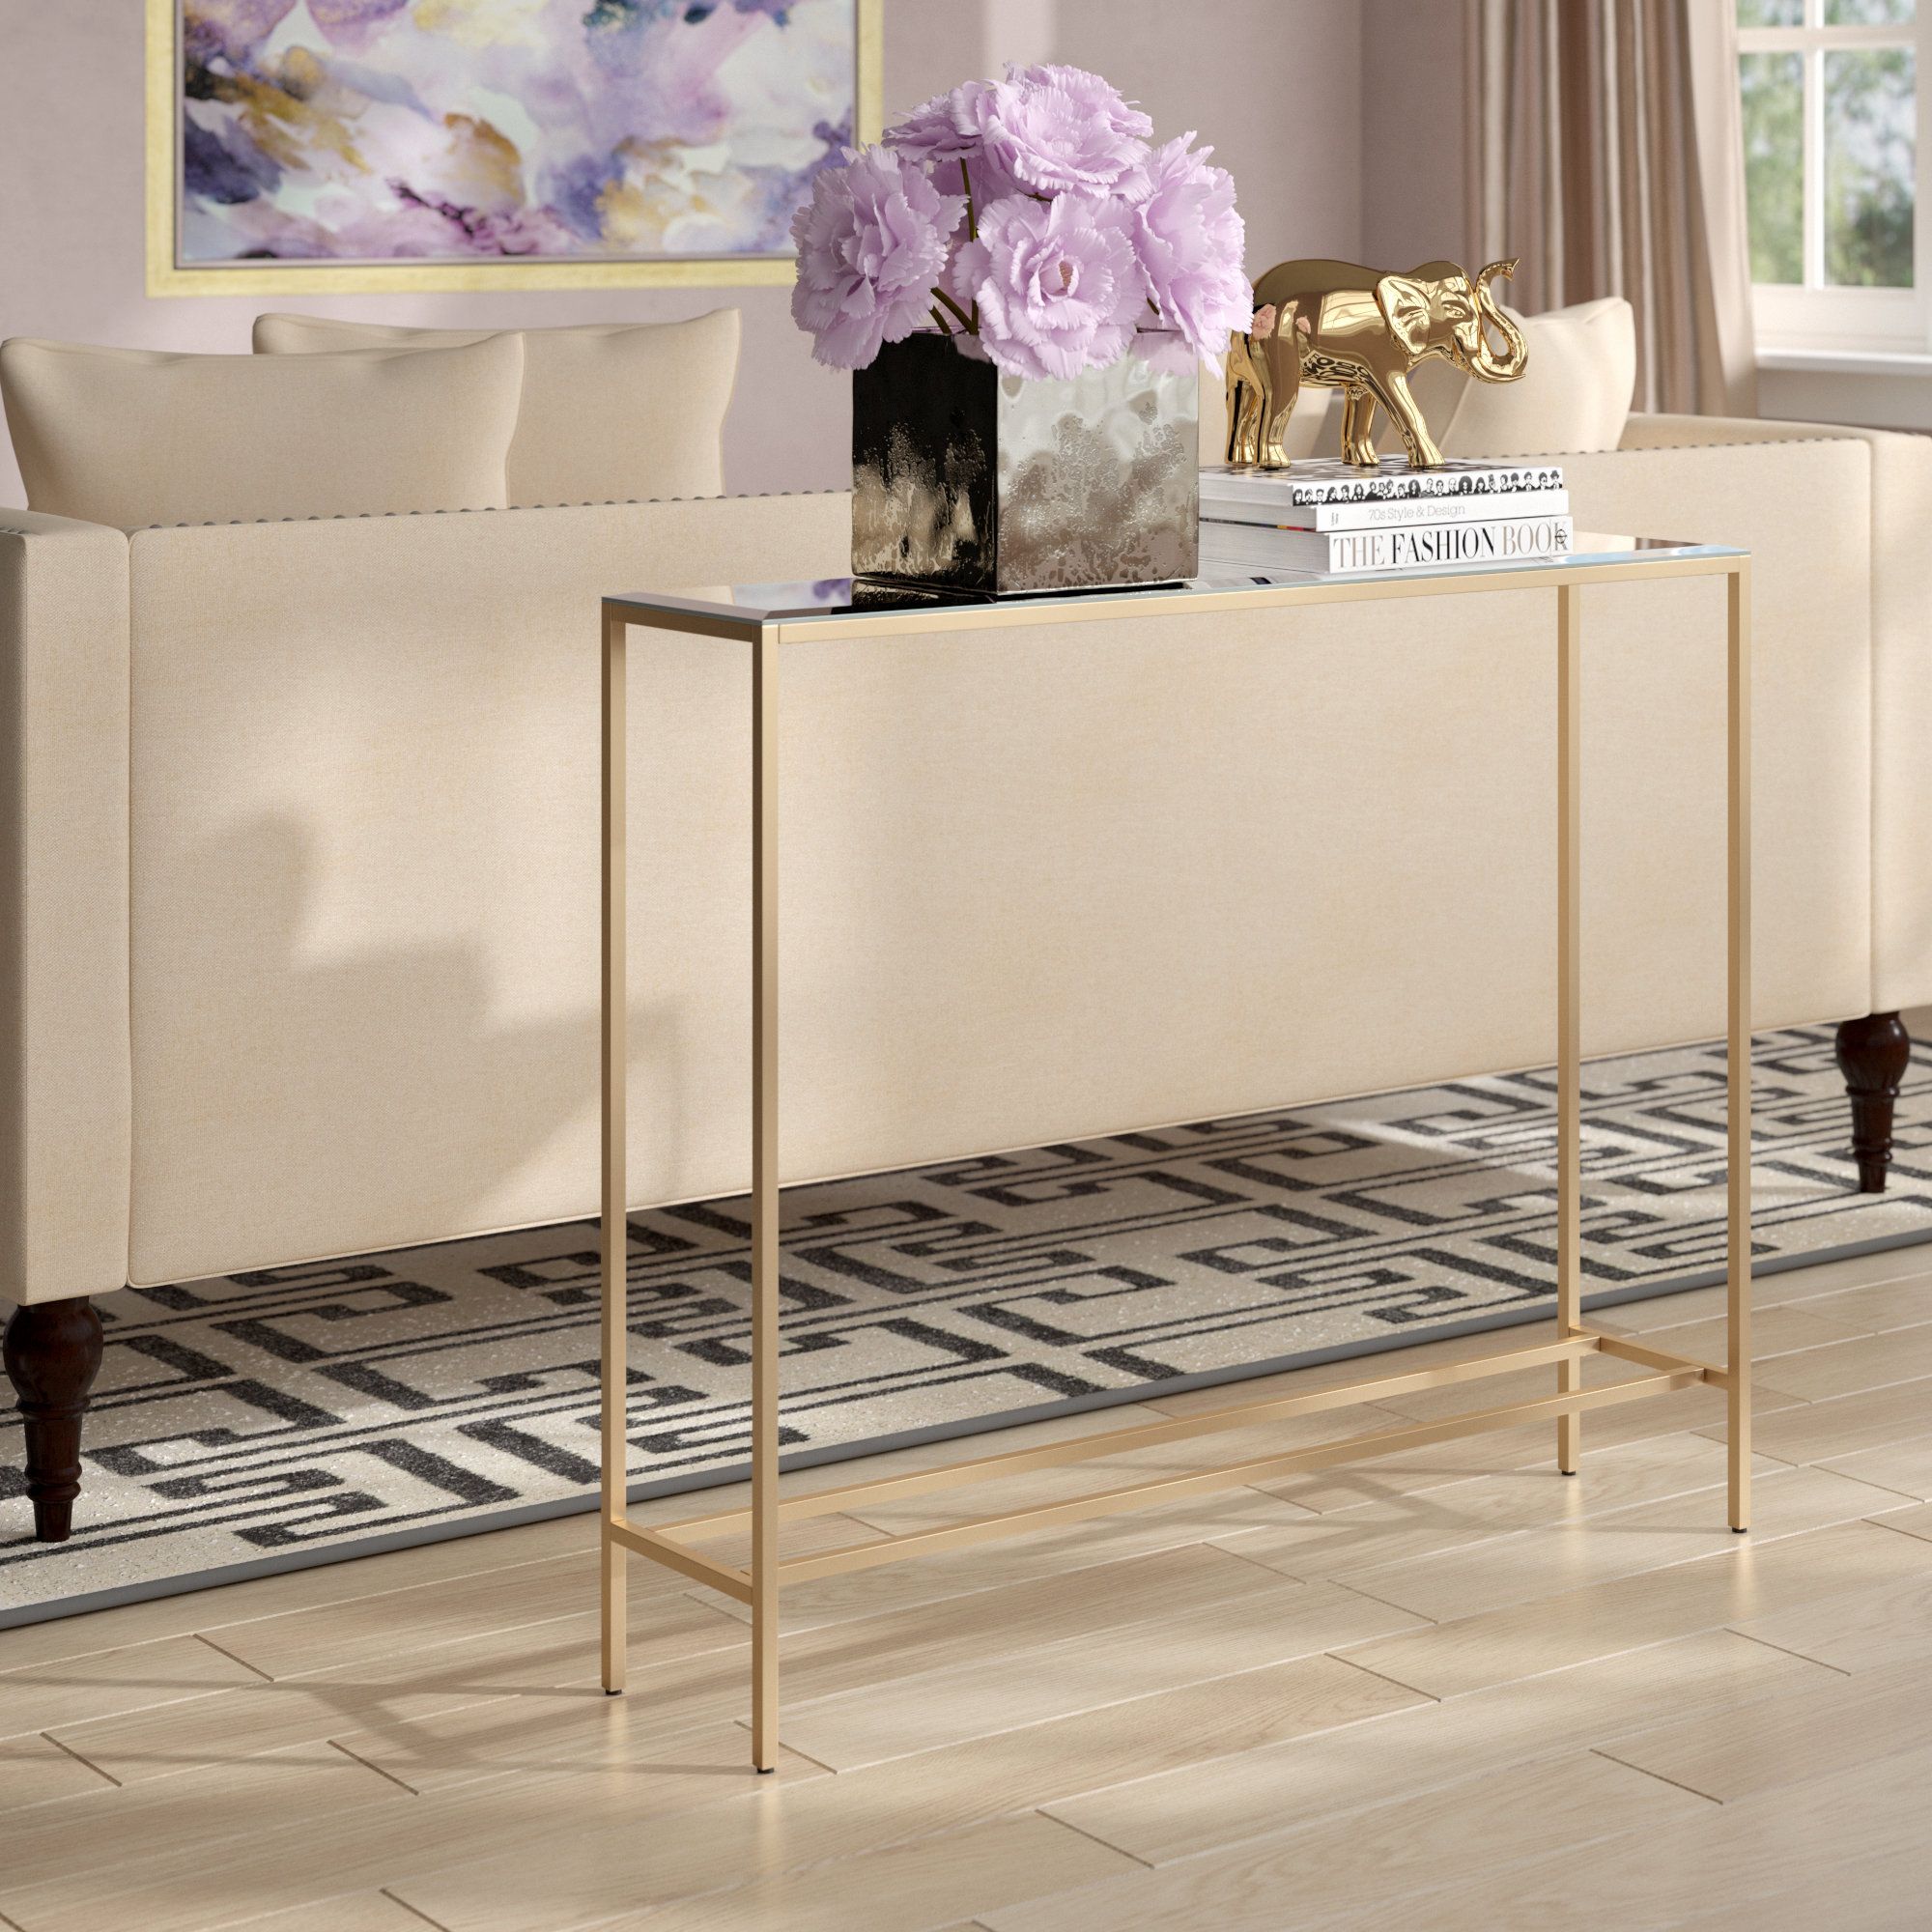 Narrow Console Tables You'll Love | Wayfair With Regard To Natural Wood Mirrored Media Console Tables (View 29 of 30)